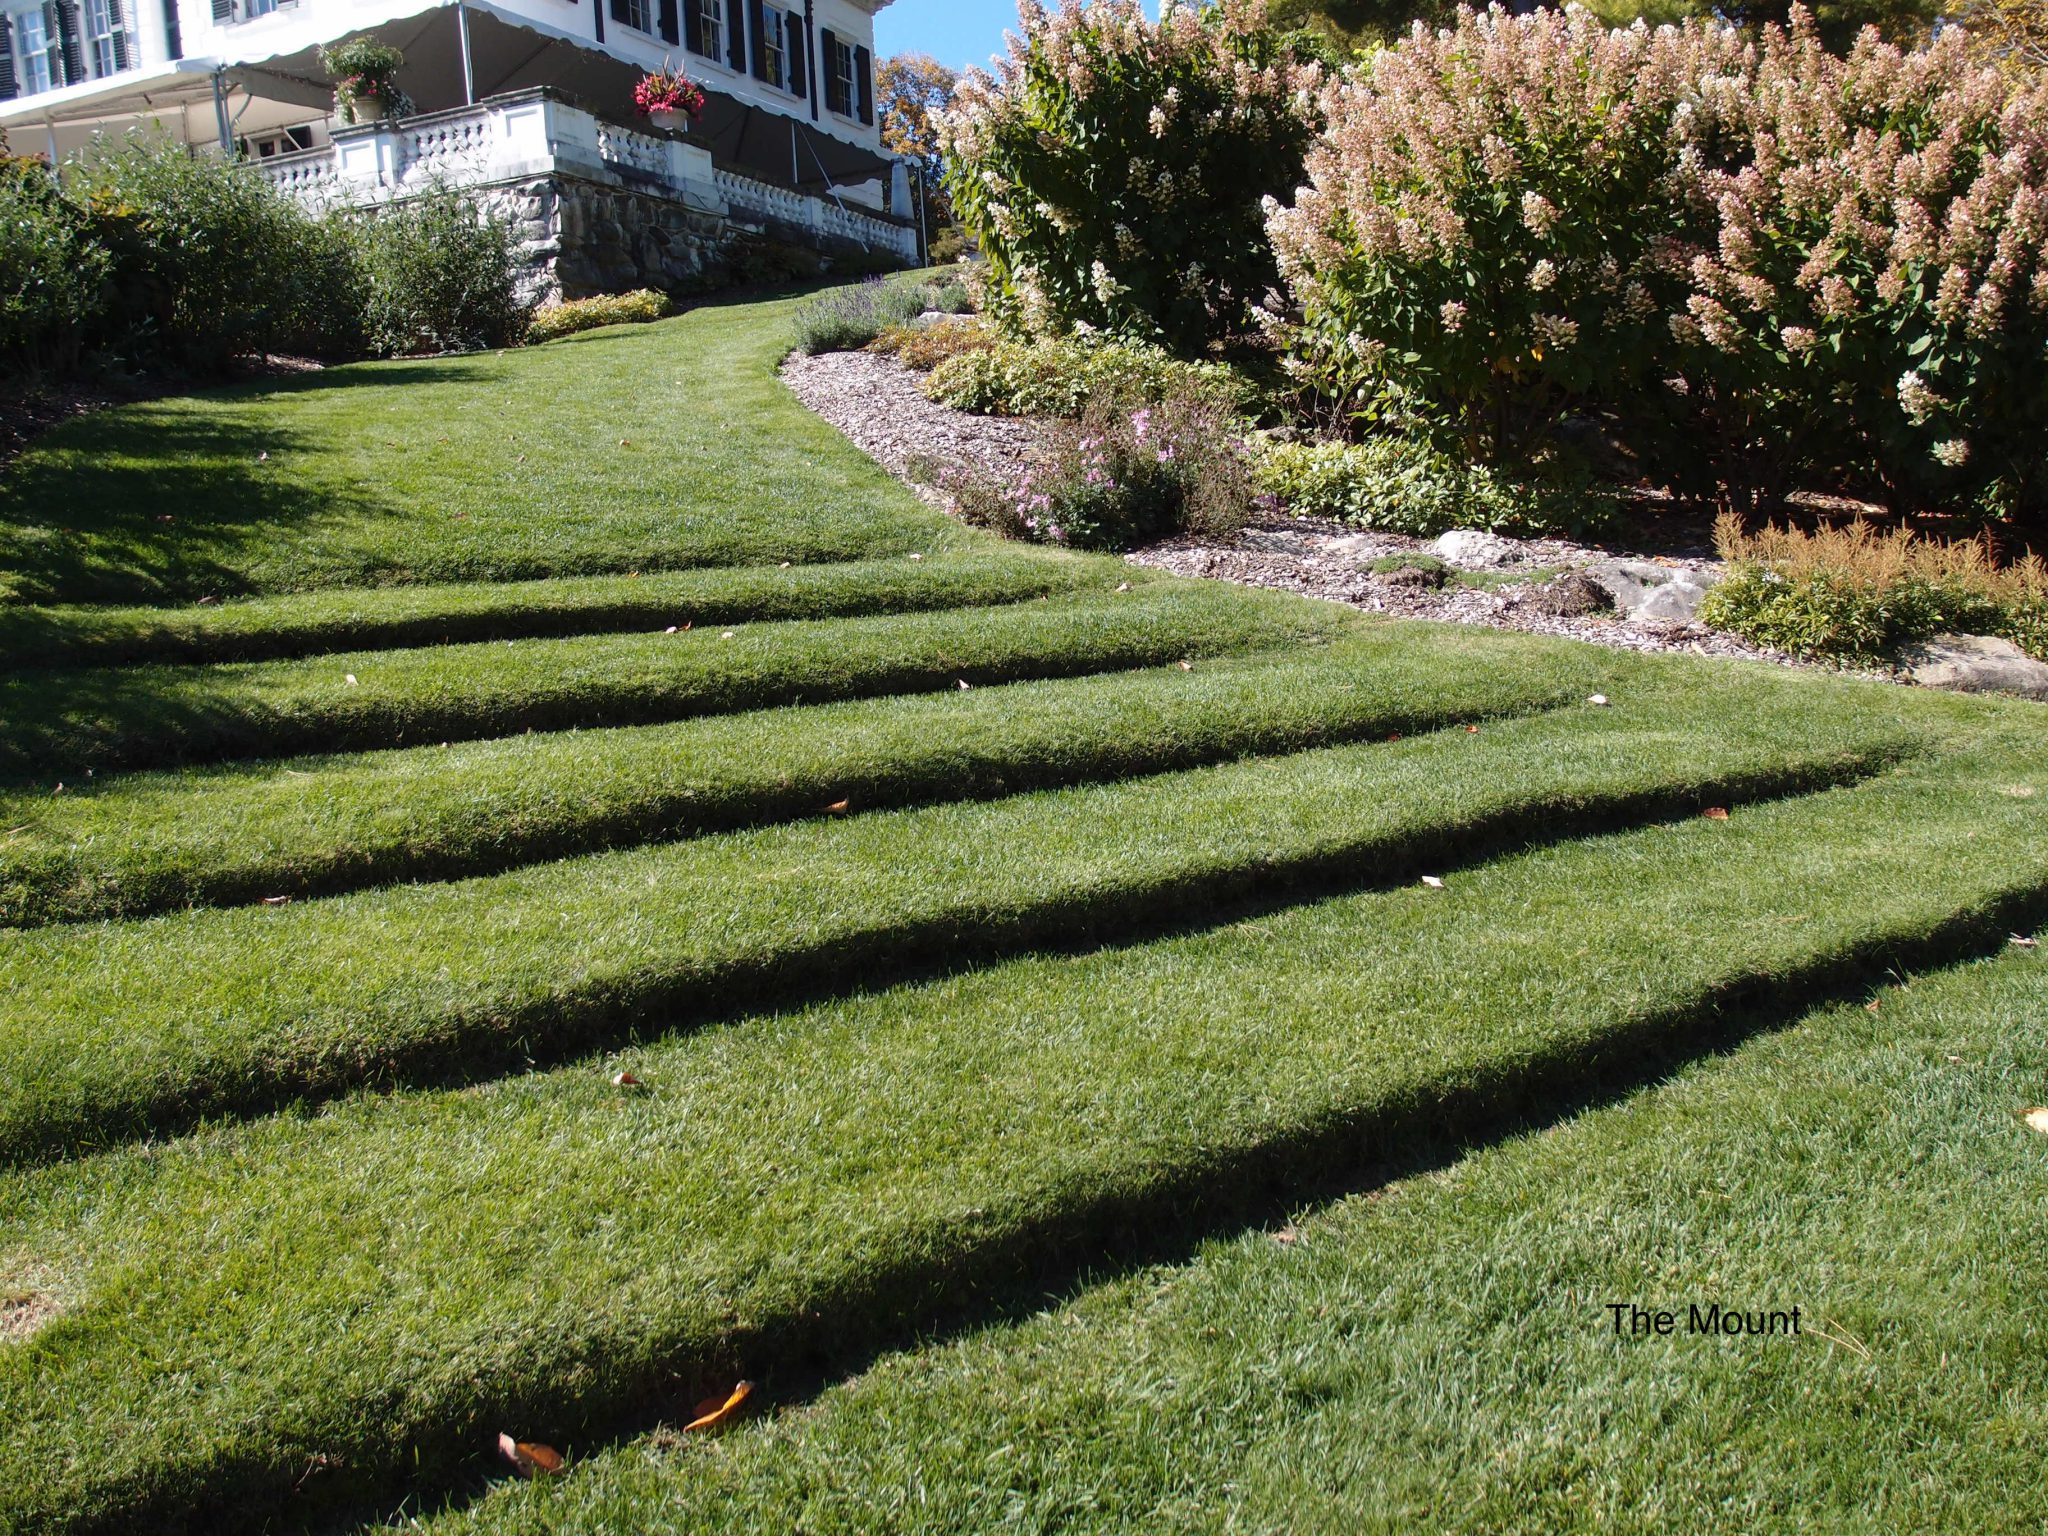 Wharton designed these essentially sculptural Grass Steps, which lead from her Flower Garden, up to the back terrace of the House.